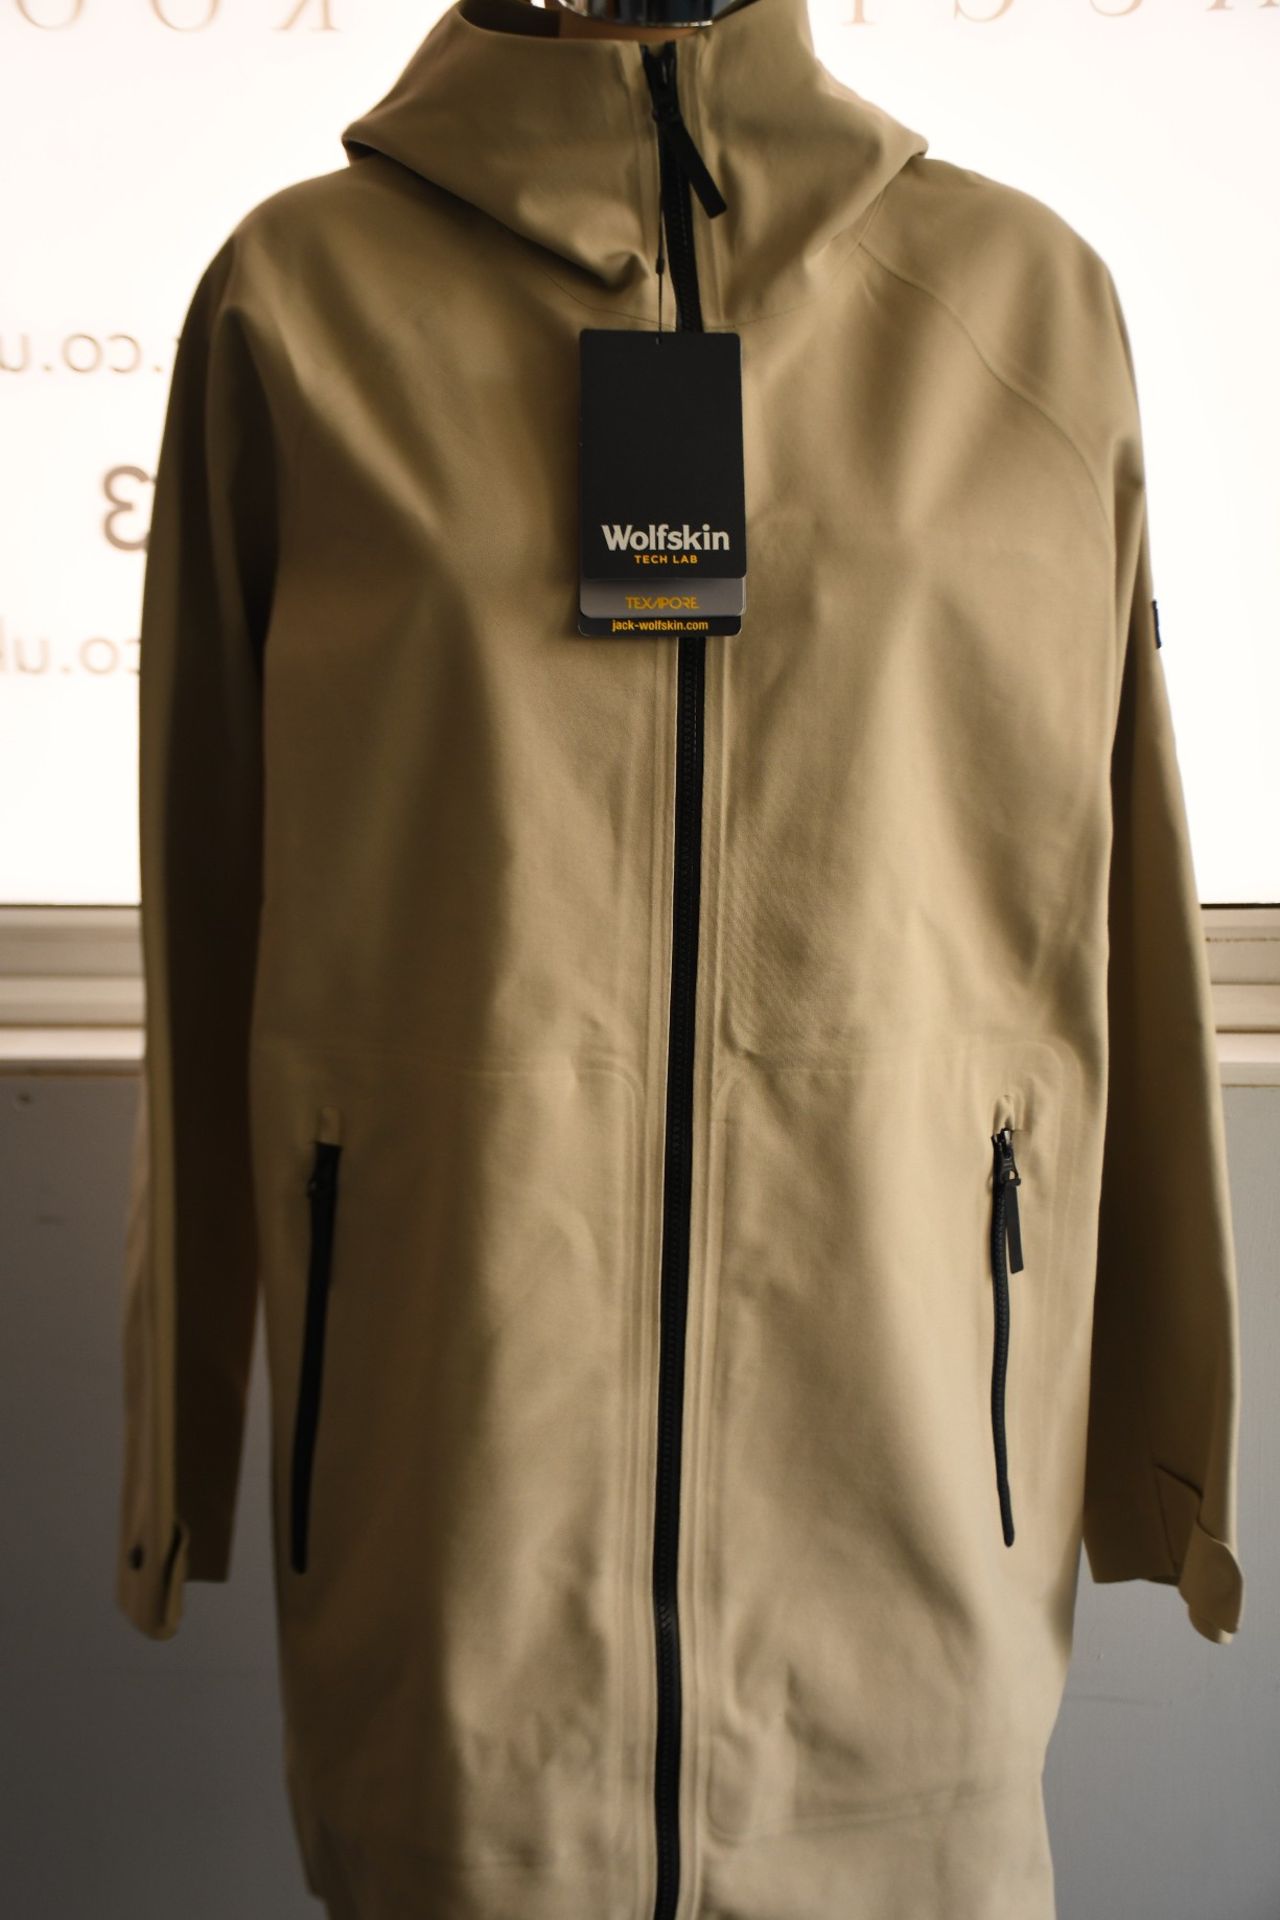 An as new Jack Wolfskin The Storm Shell jacket in almond (M).